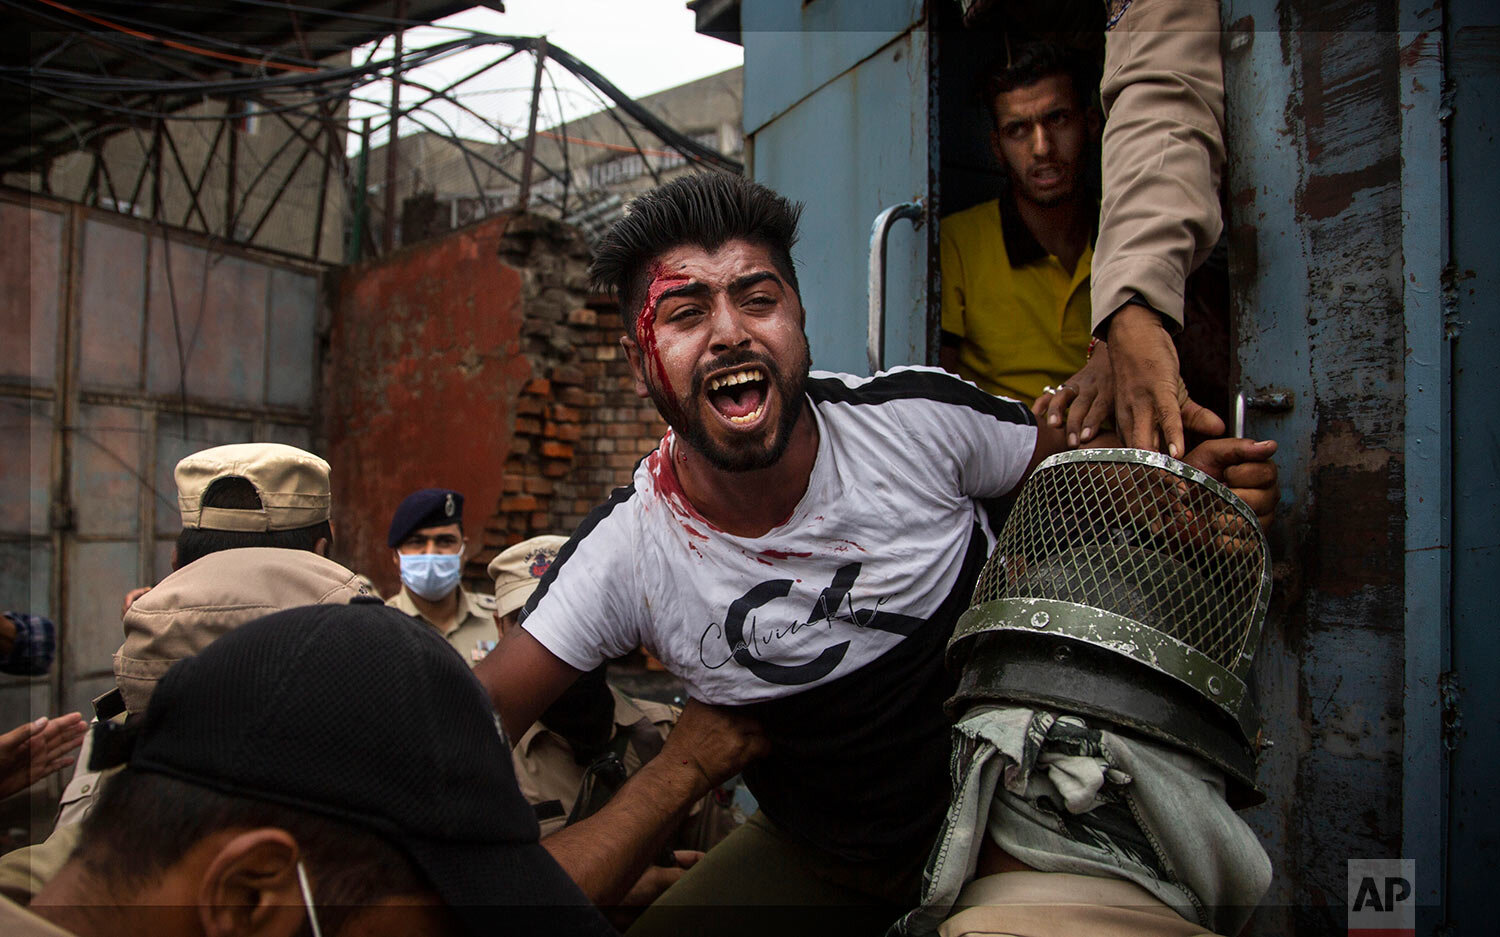  Indian policemen detain a Kashmiri Shiite Muslim as he attempt with others to take out a religious procession in Srinagar, Indian controlled Kashmir, Friday, Aug. 28, 2020.  (AP Photo/Mukhtar Khan) 